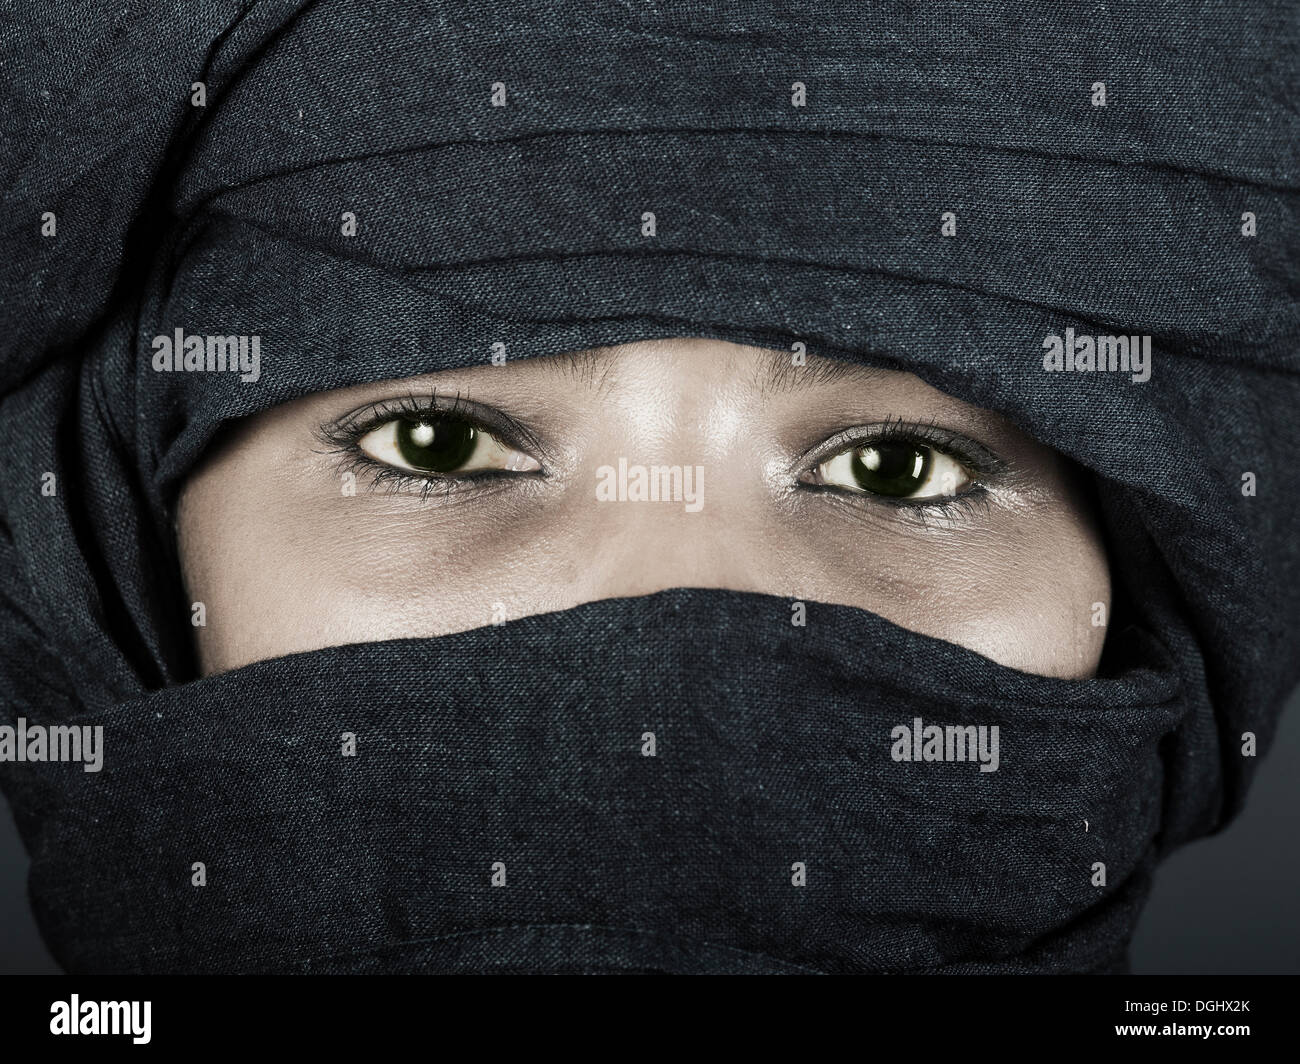 Tuareg girl, Targia, veiled with a chech with only her eyes visible, Algeria, North Africa, Africa Stock Photo